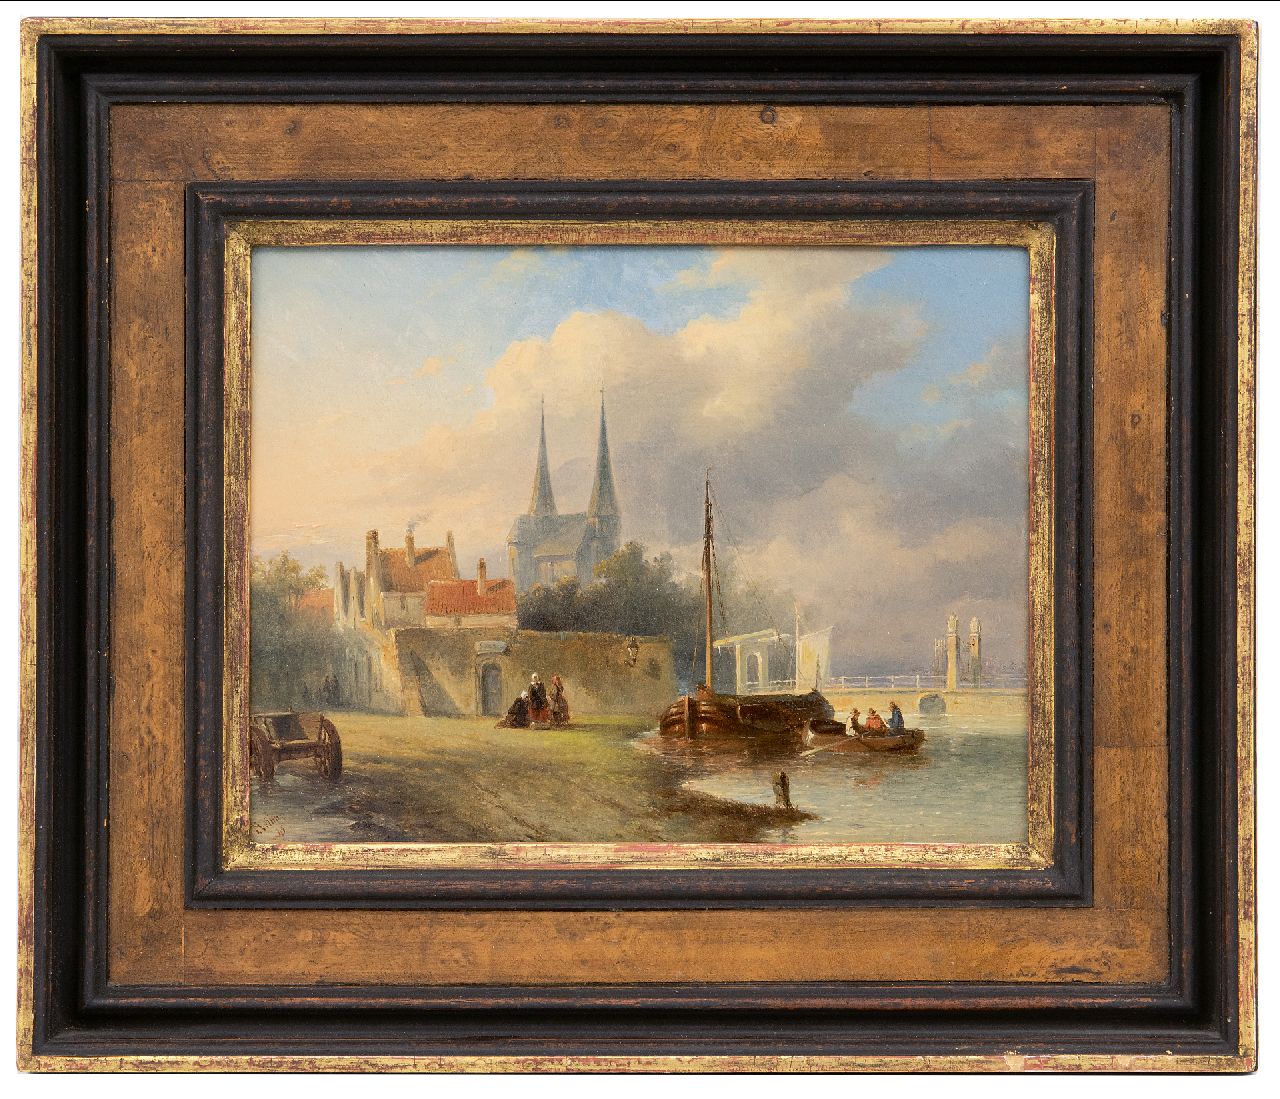 Vertin P.G.  | Petrus Gerardus Vertin, A Dutch town along a river, oil on panel 19.4 x 25.6 cm, signed l.l. and dated '45